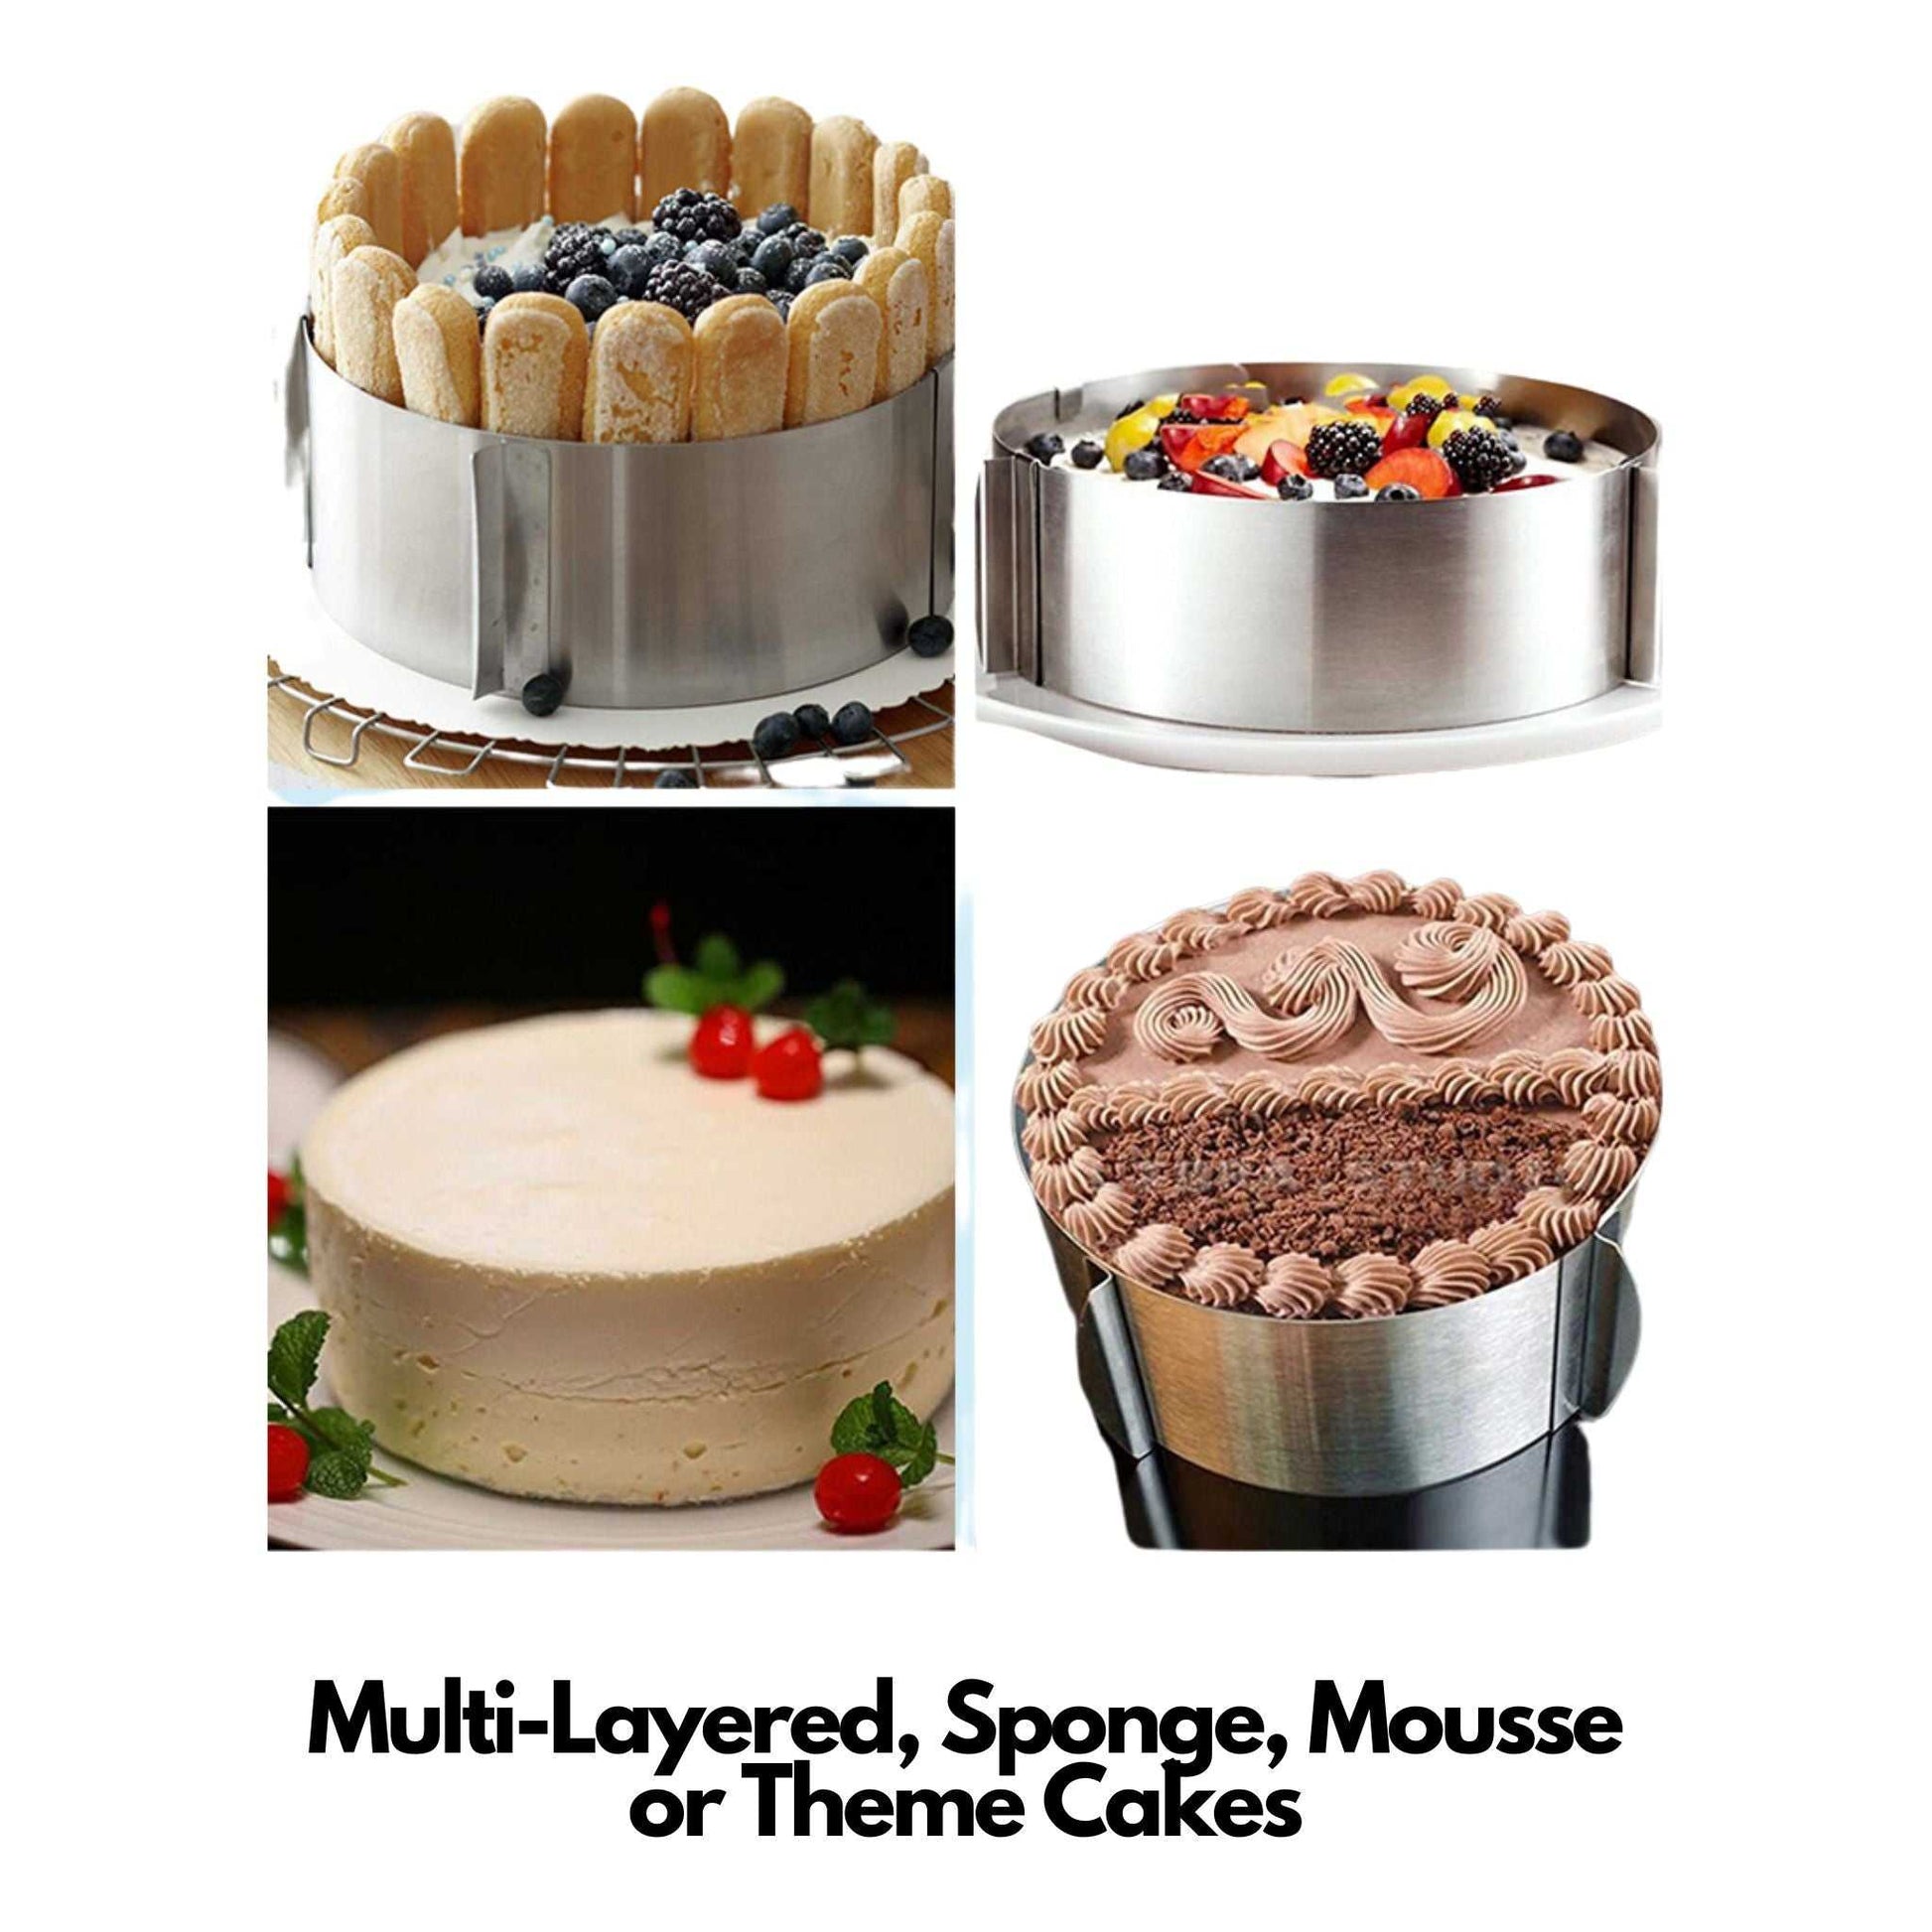 Adjustable Mousse Mold Stainless Steel